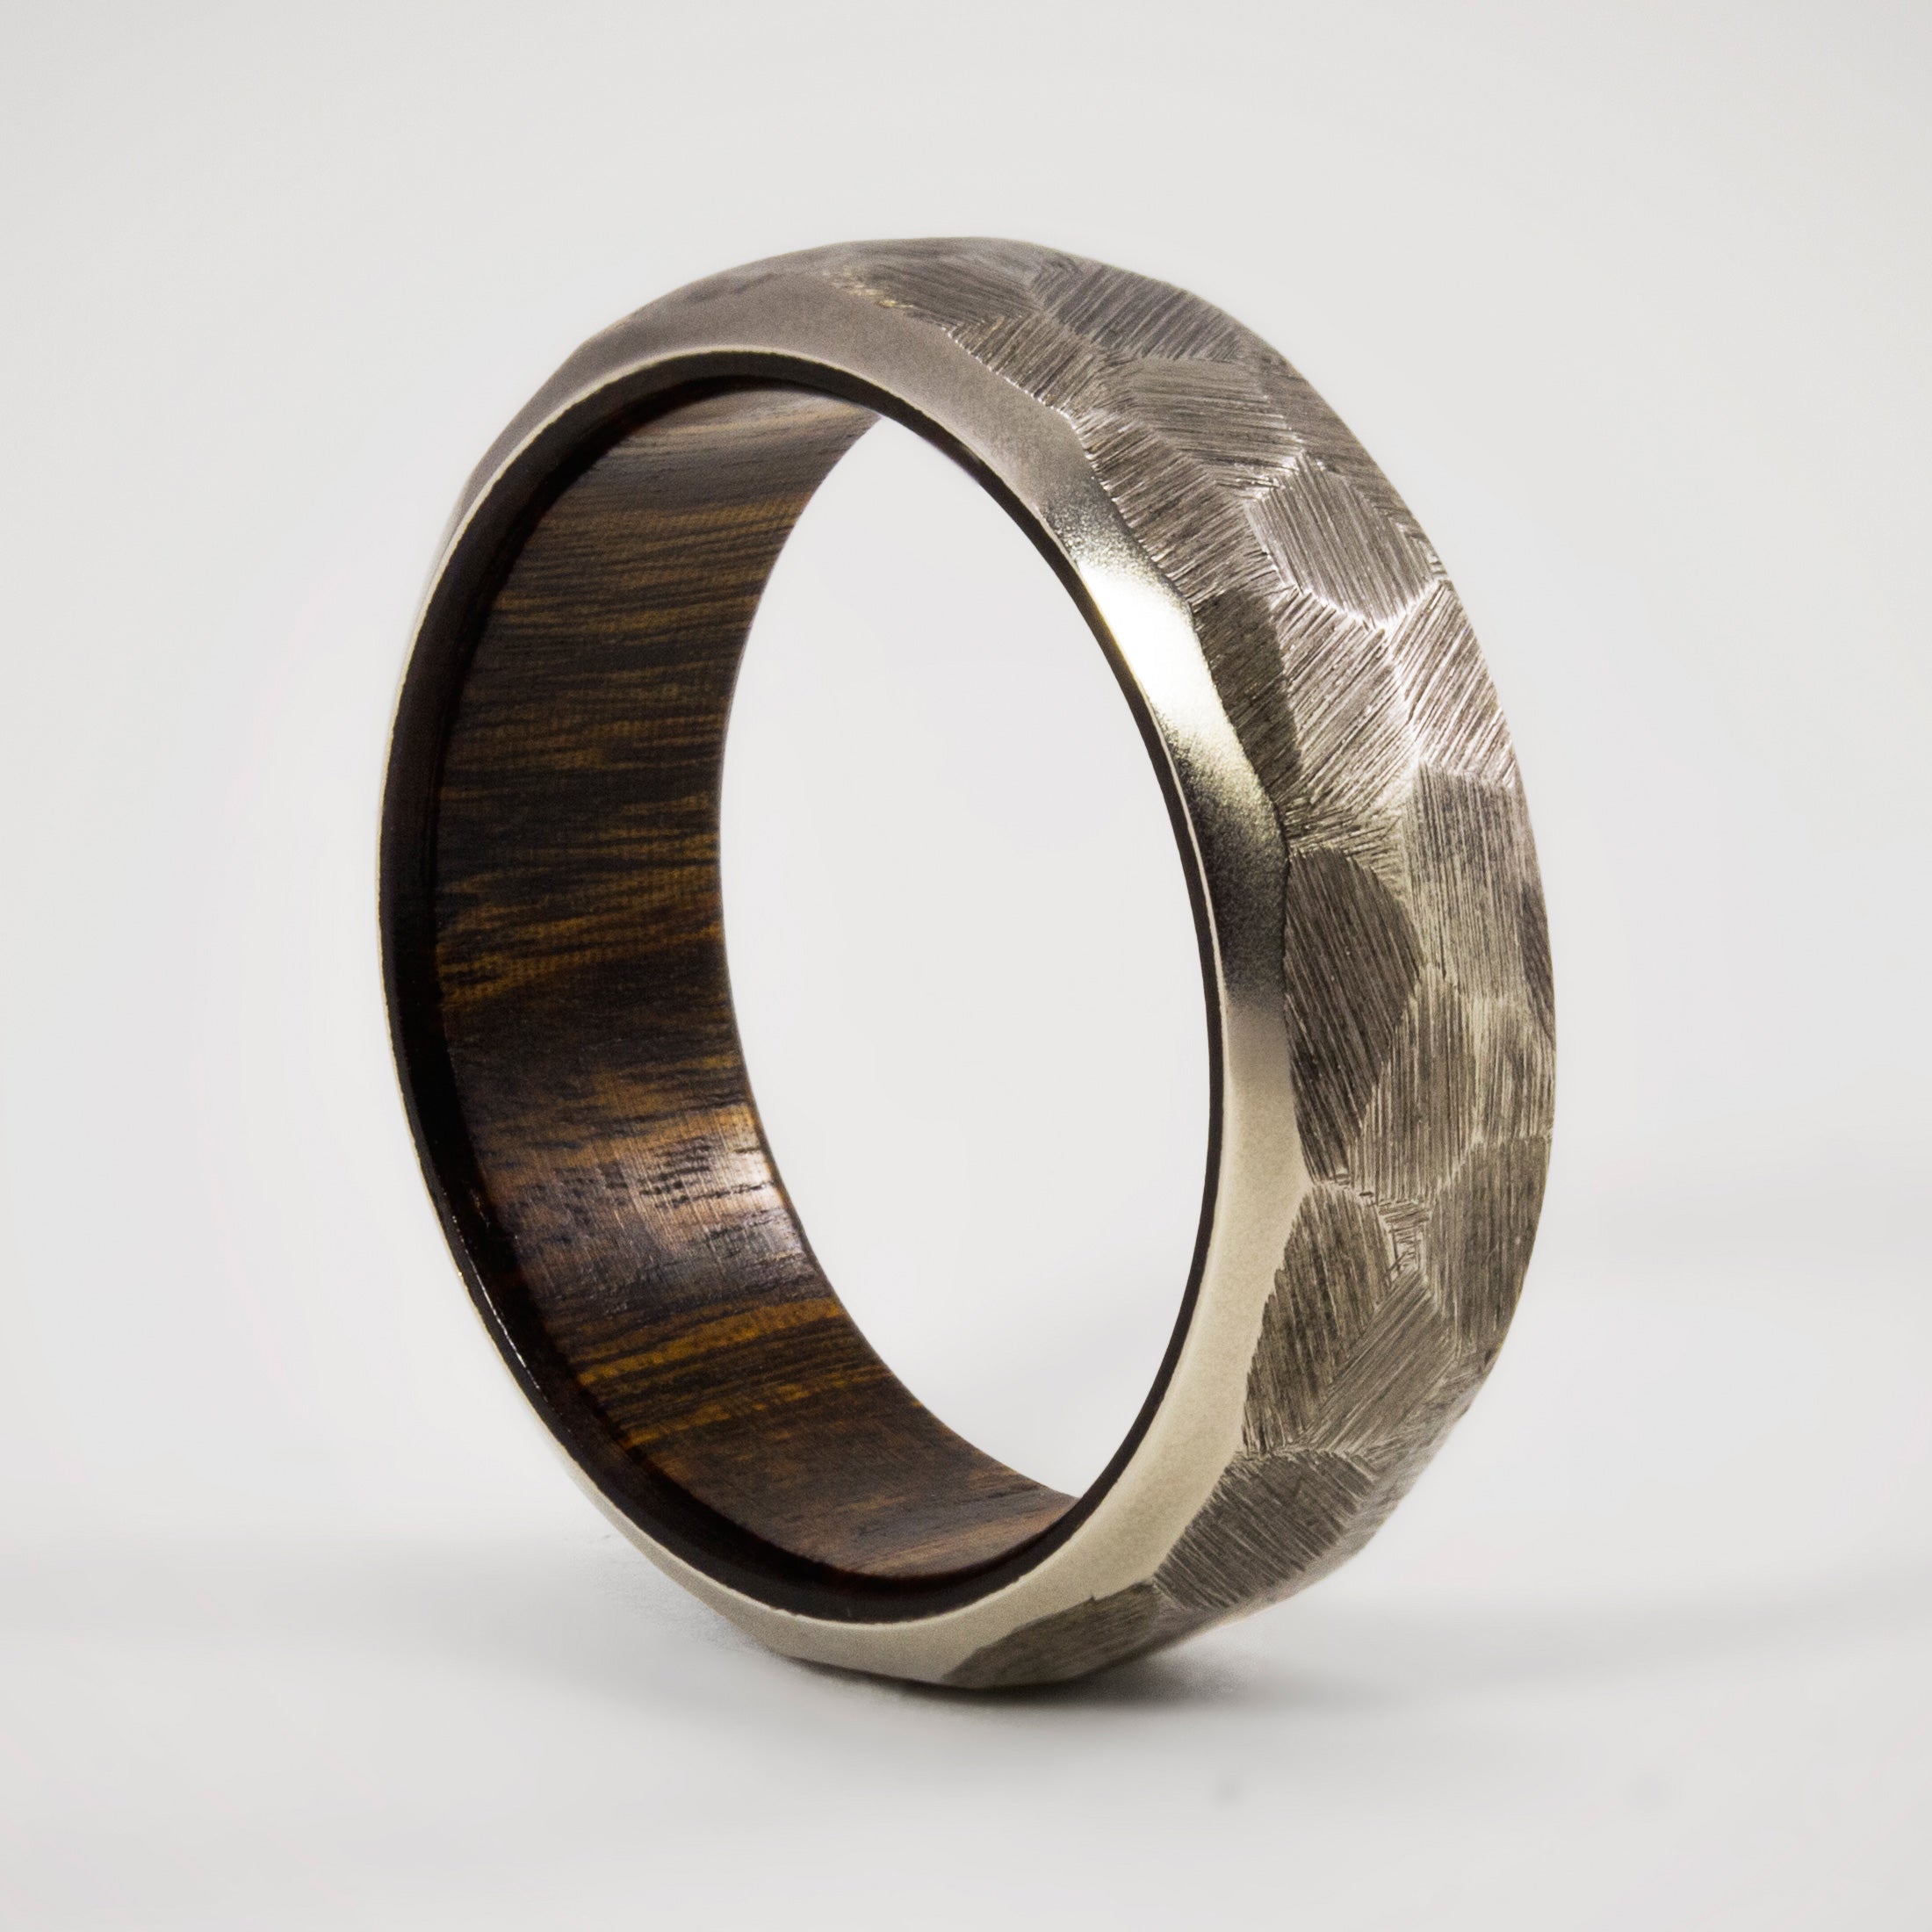 Hammered titanium and wood ring